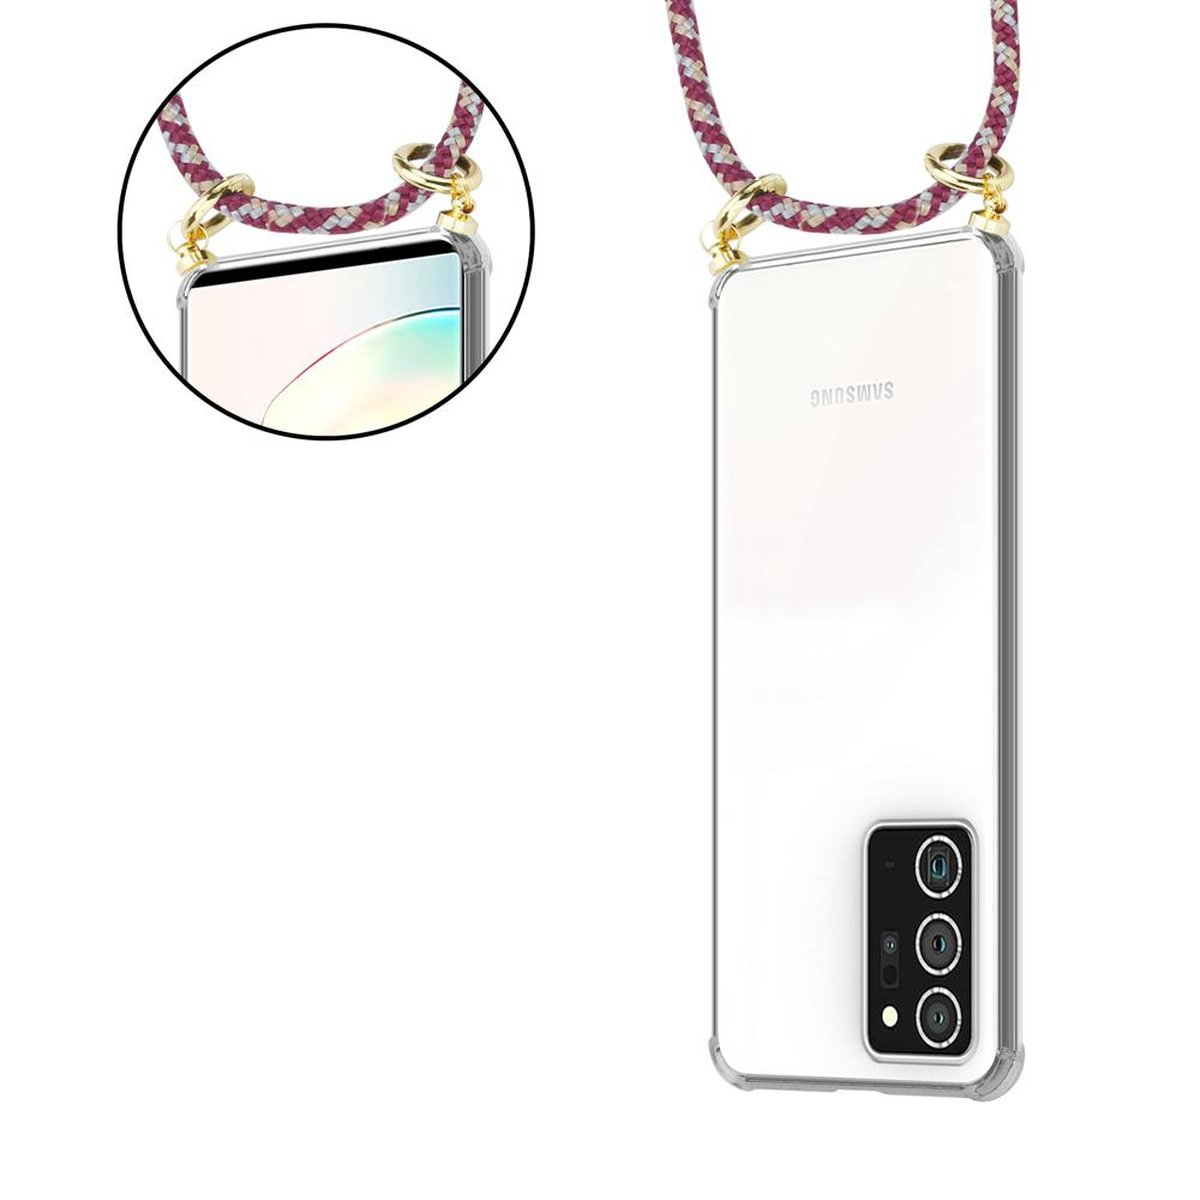 CADORABO Handy Kette 20 Backcover, abnehmbarer mit Hülle, WEIß GELB NOTE Samsung, Gold und Kordel Galaxy PLUS, Band Ringen, ROT